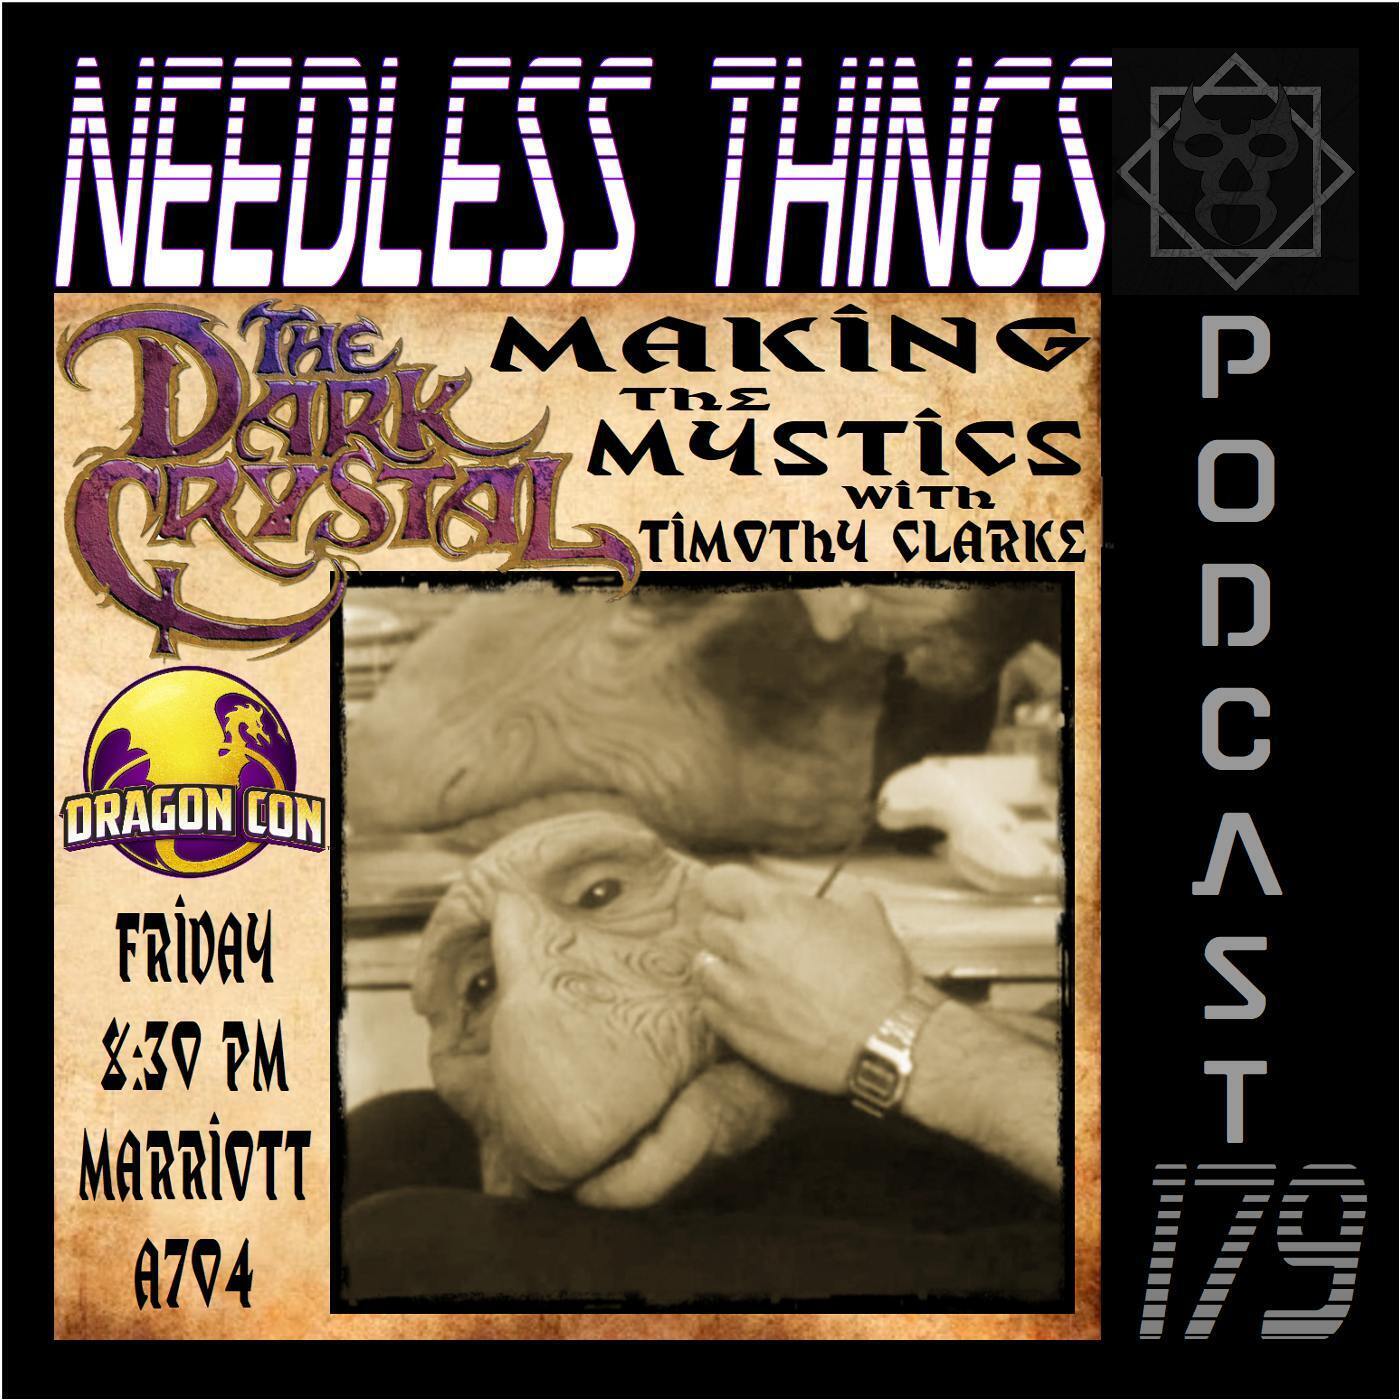 Needless Things Podcast 179 – The Dark Crystal: Making the Mystics with Tim Clarke